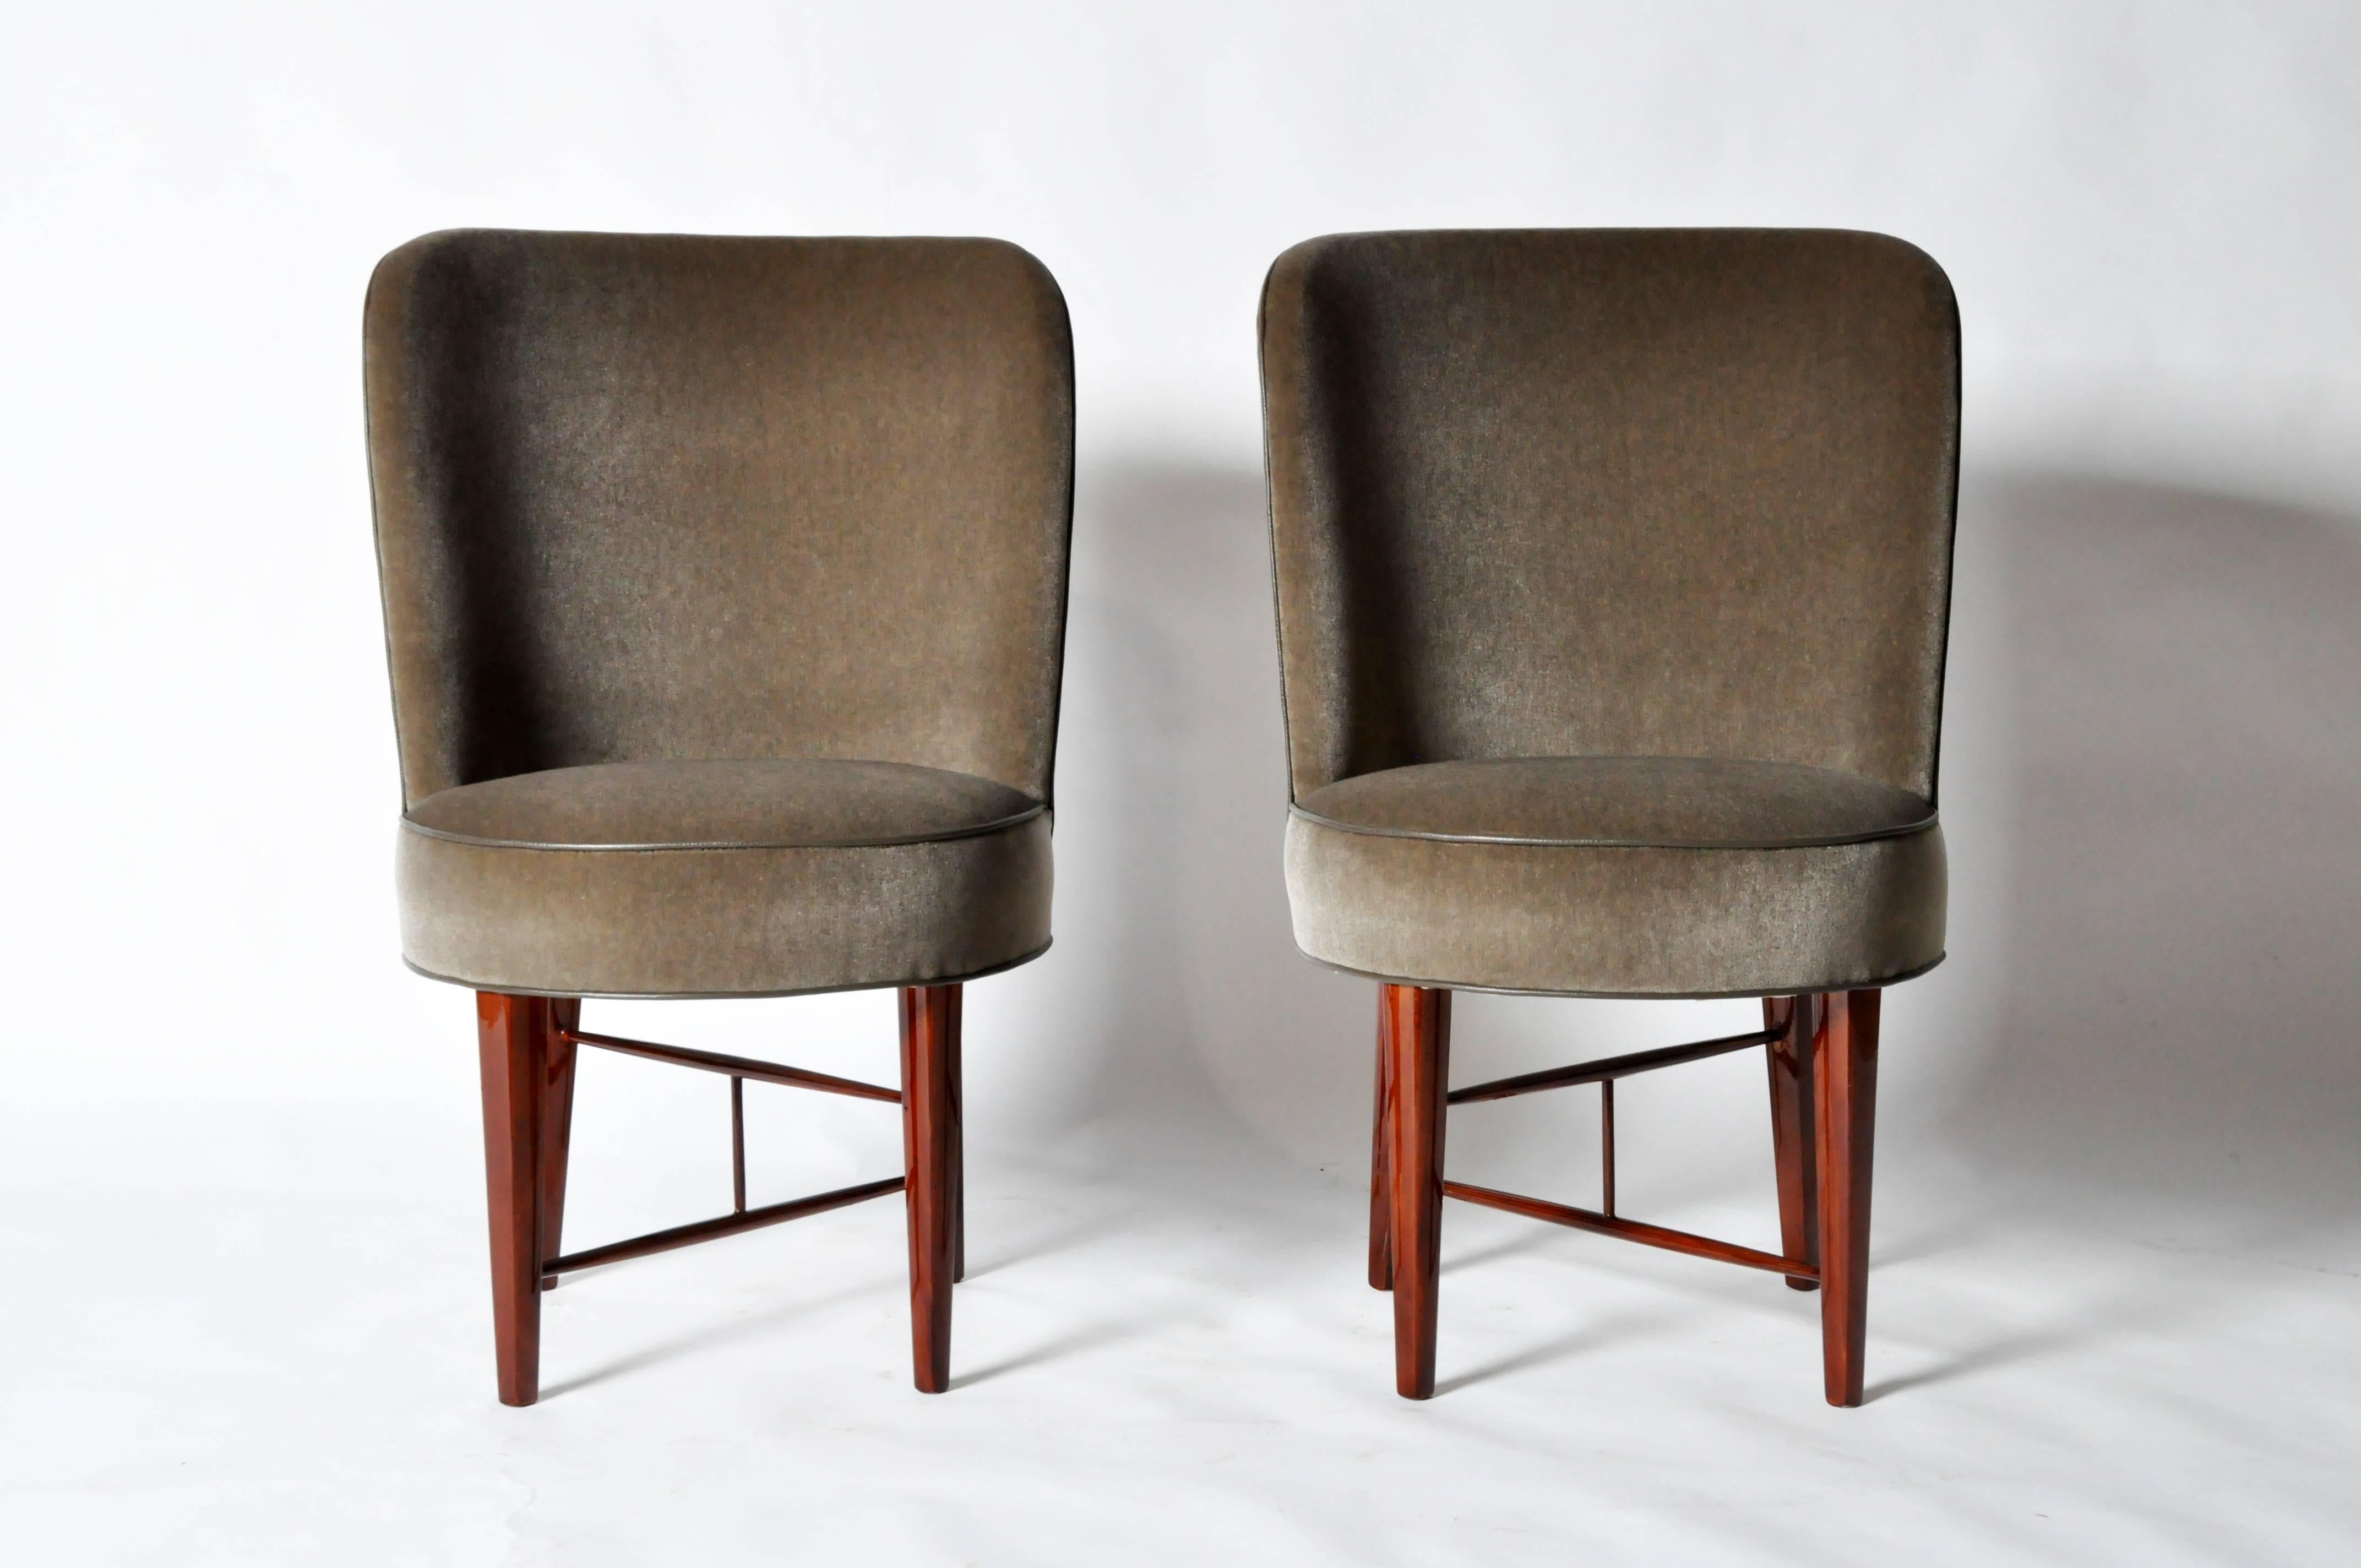 Having curved upholstered backs and seats, raised above solid walnut legs and X-form stretchers.